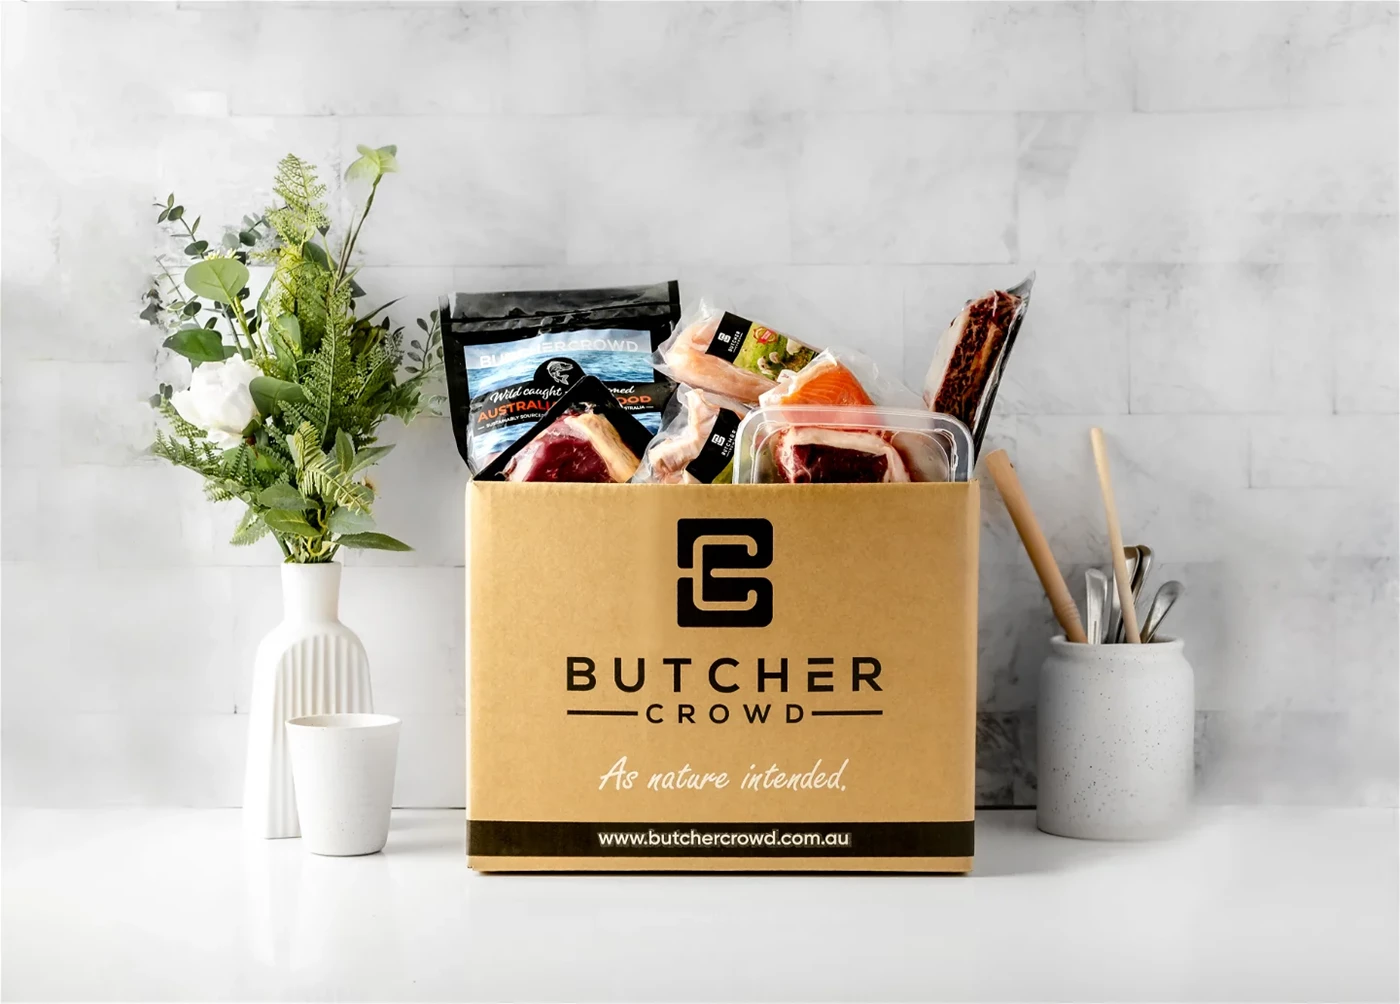 A box of meat and seafood from Butcher Crowd, places in a kitchen next to a vase of flowers,